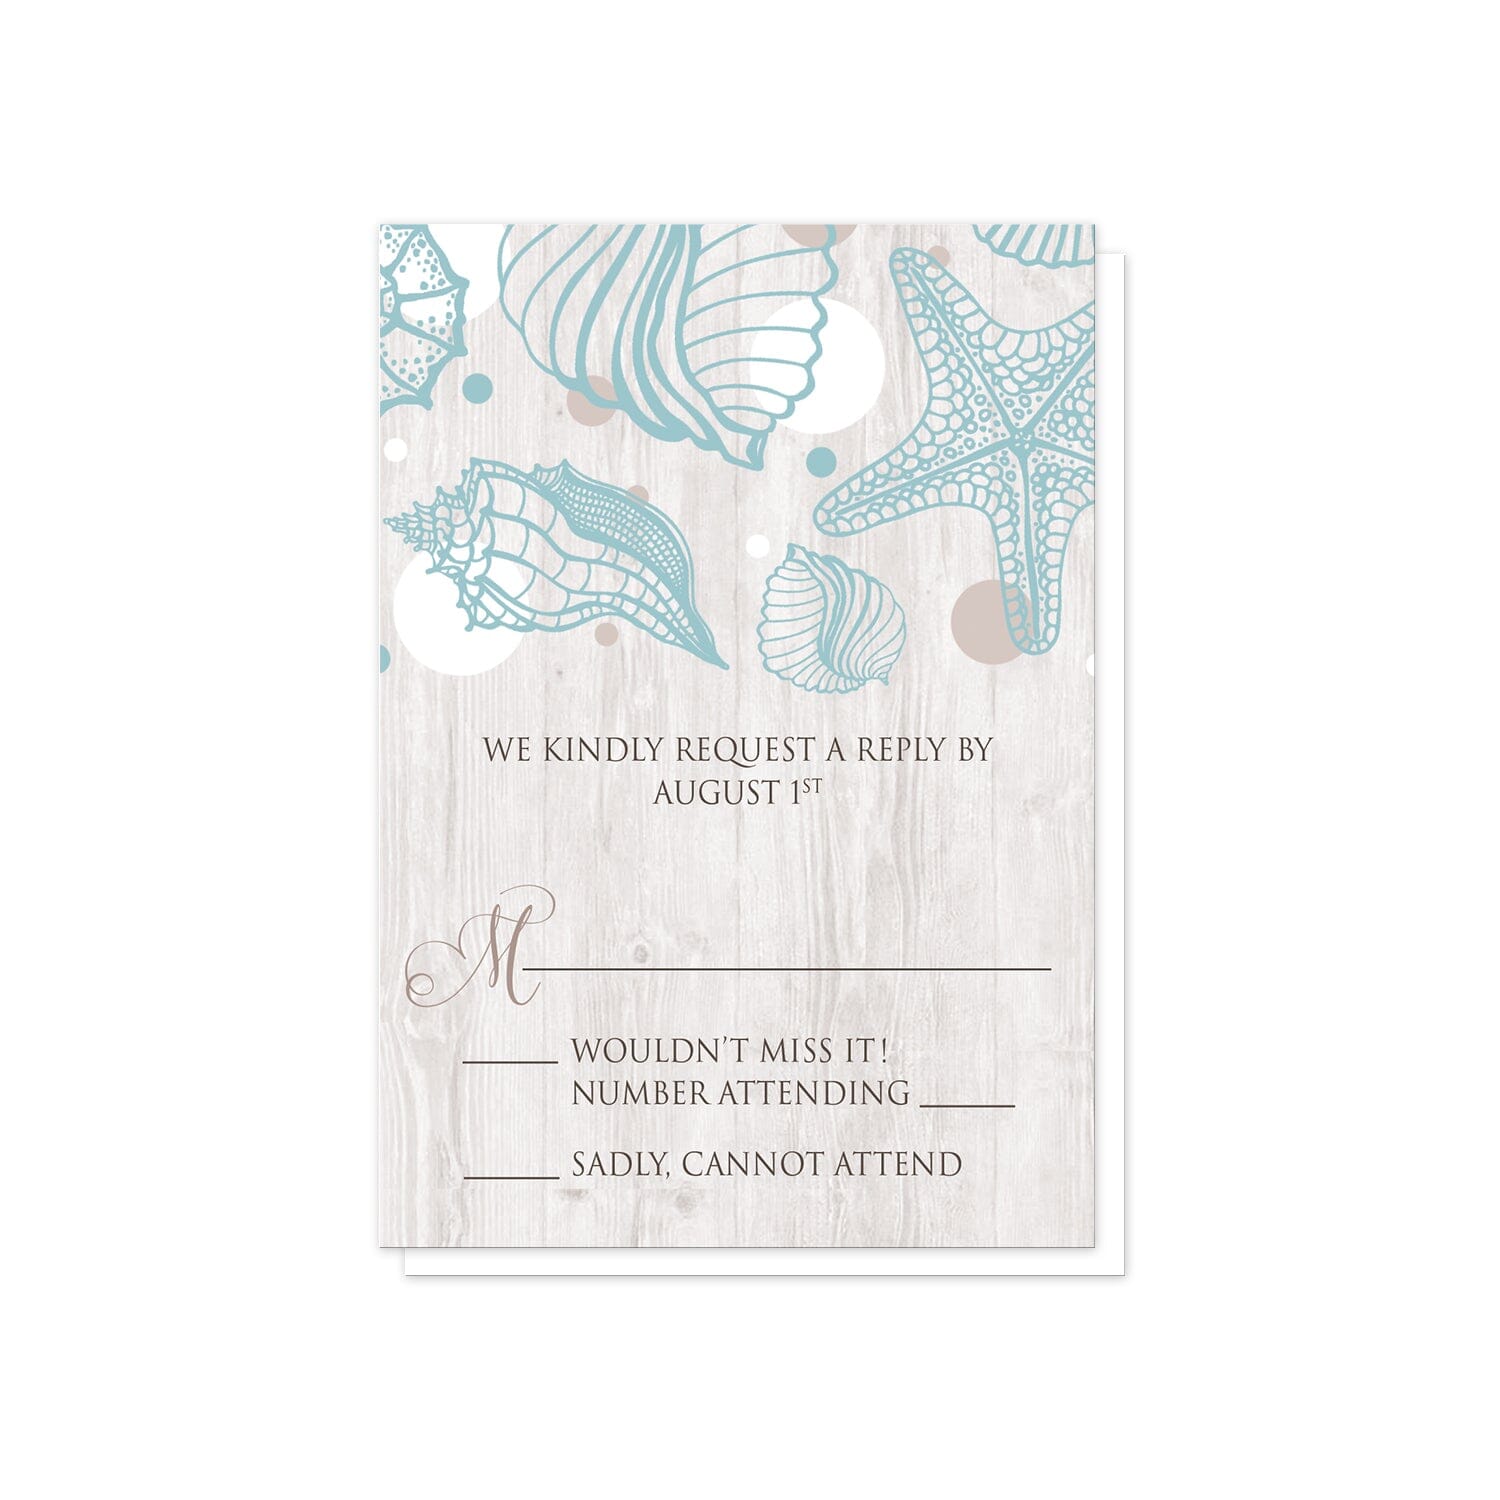 Seashell Whitewashed Wood Beach RSVP Cards at Artistically Invited.